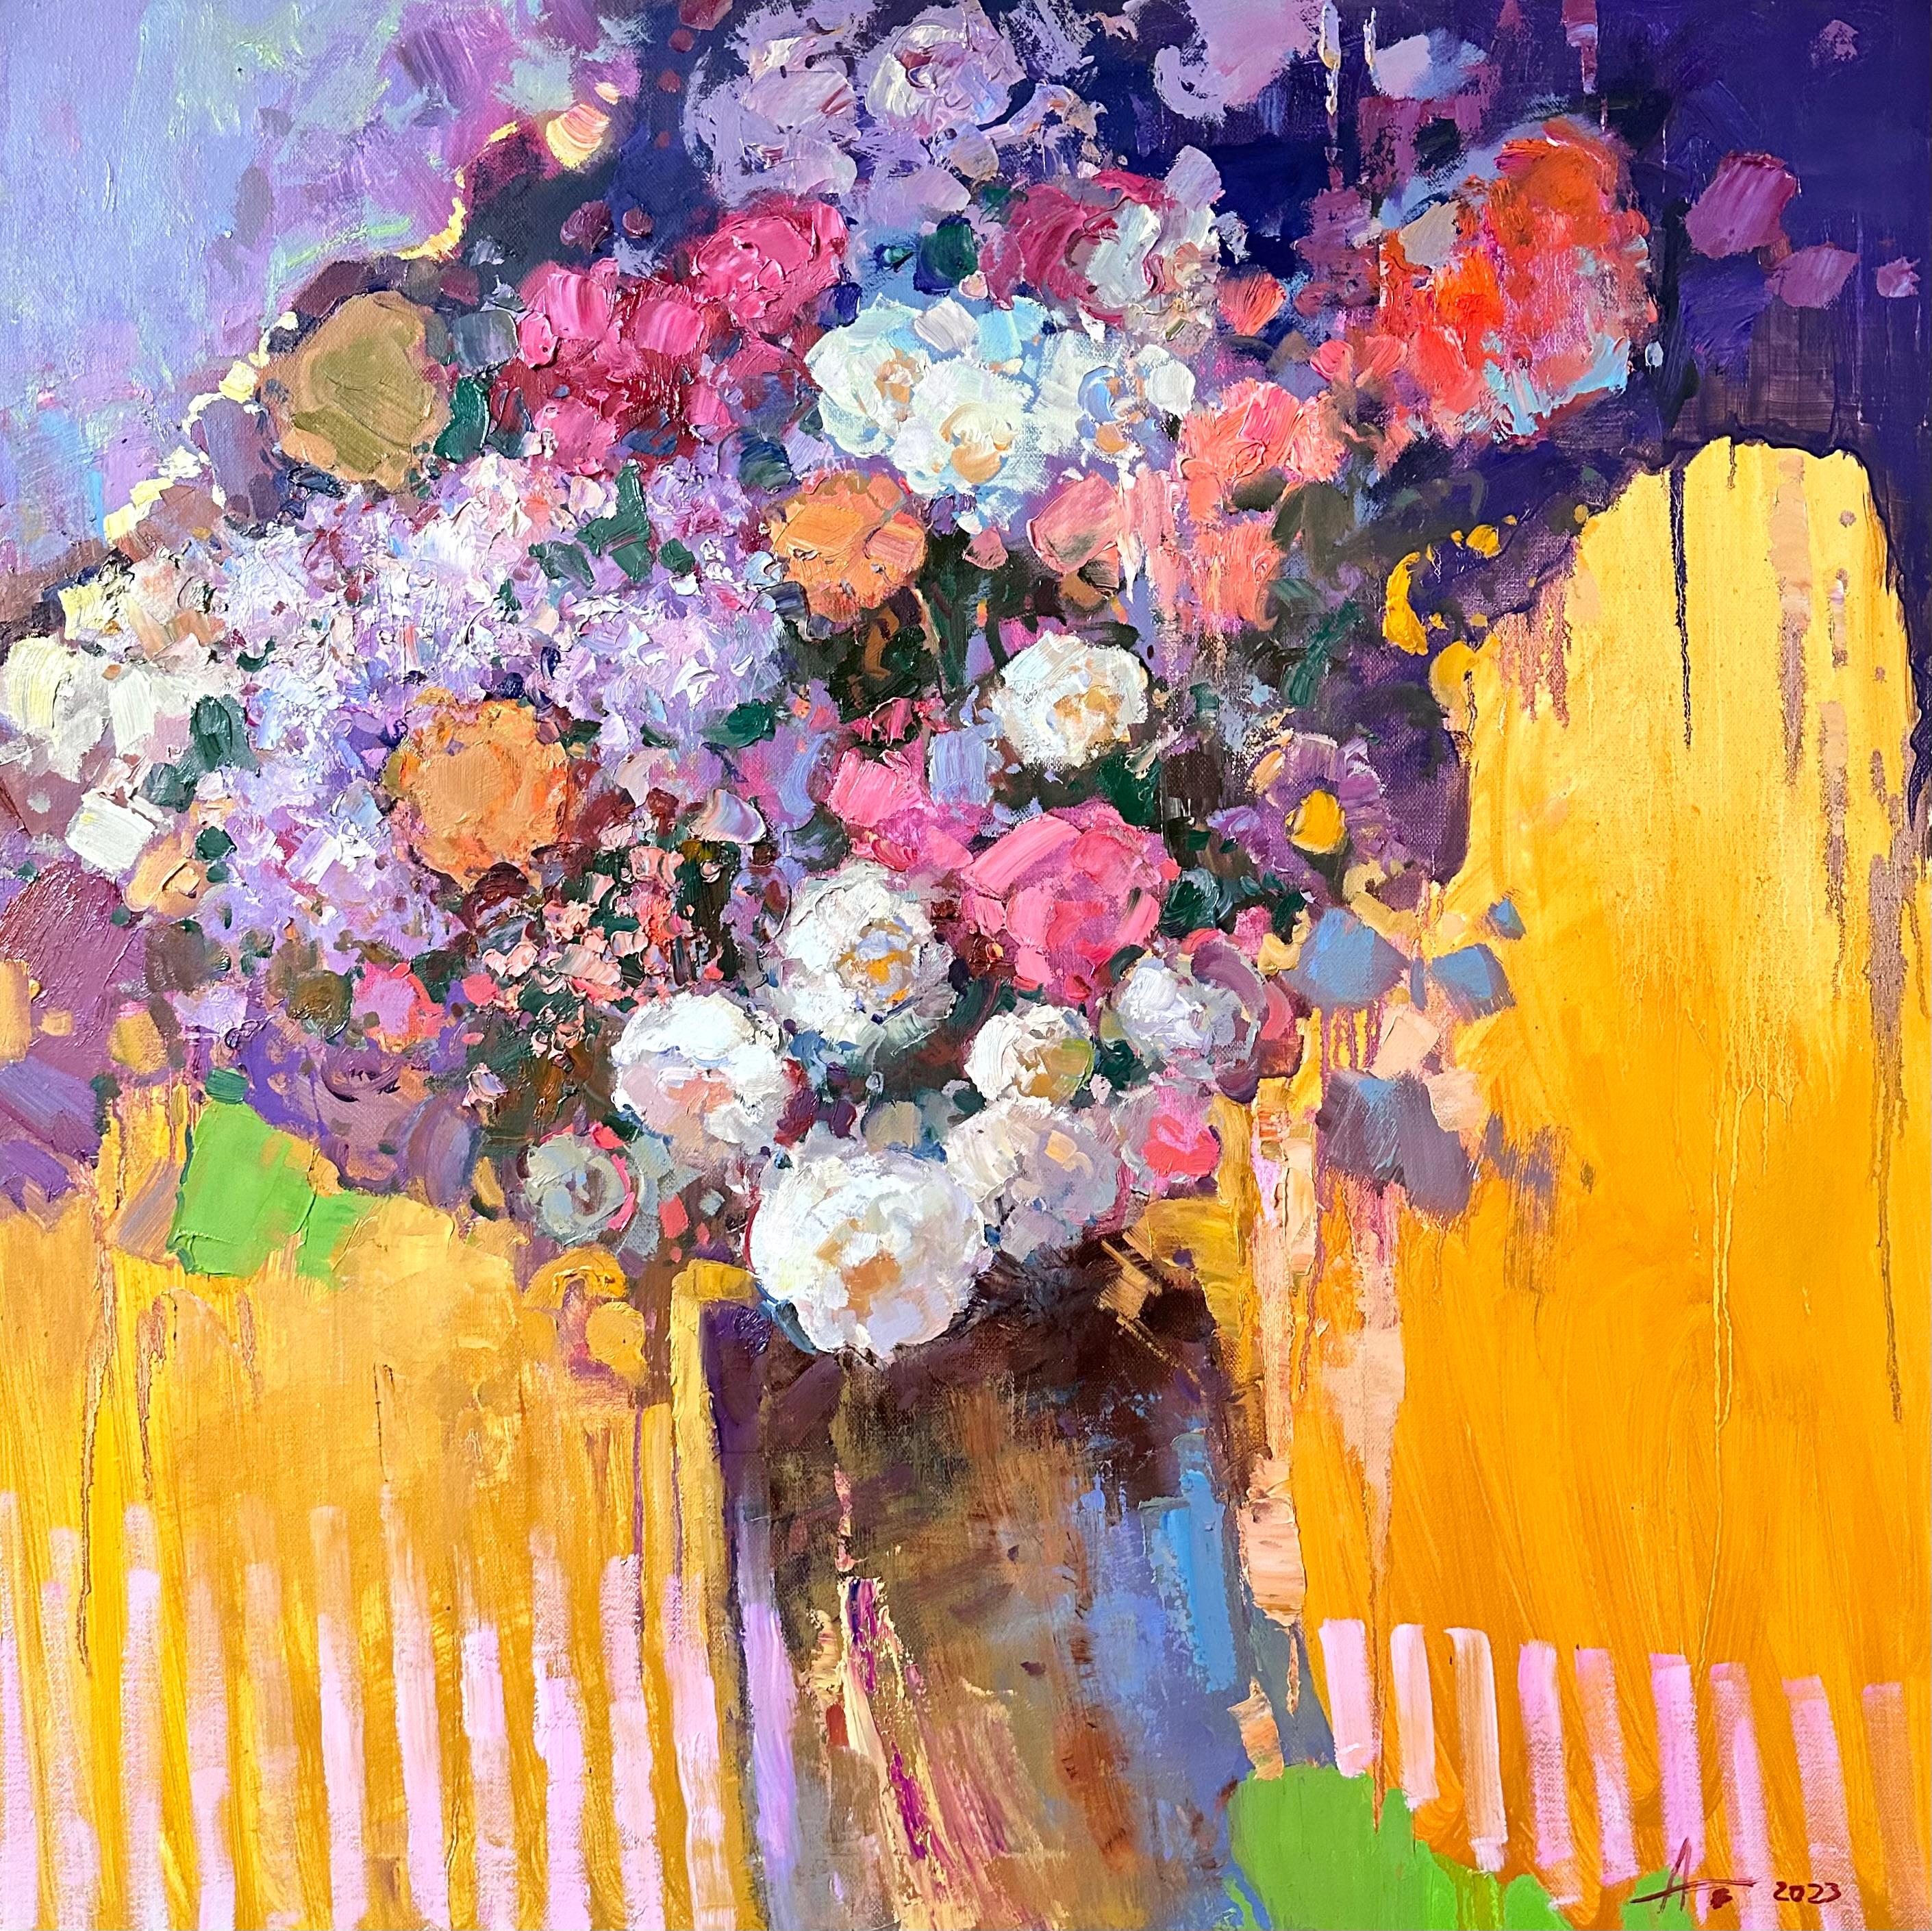 "Bouquet on Gold" is a mesmerizing painting where a picturesque bouquet of flowers blossoms against the shimmering background of golden light. The vibrant and saturated colors of the flowers create an impressive contrast with the warm tones of the